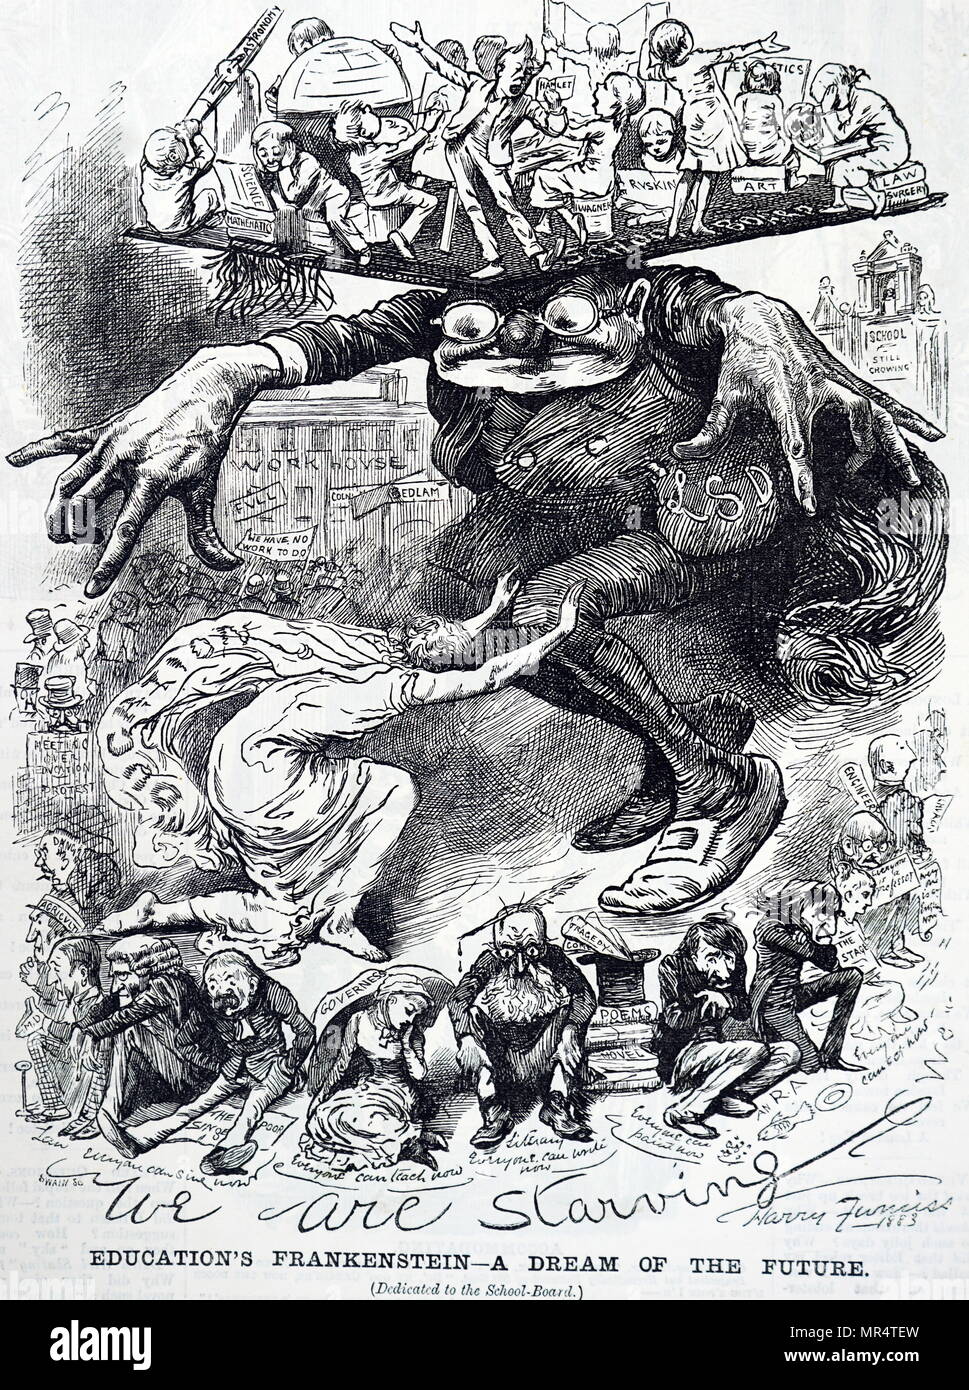 Cartoon commenting on board schools. The professional classes feared that universal publicly funded education would create too many 'educated' people, and so put them out of work. Illustrated by Harry Furniss (1854-1925) and Irish artist and illustrator. Dated 19th century Stock Photo